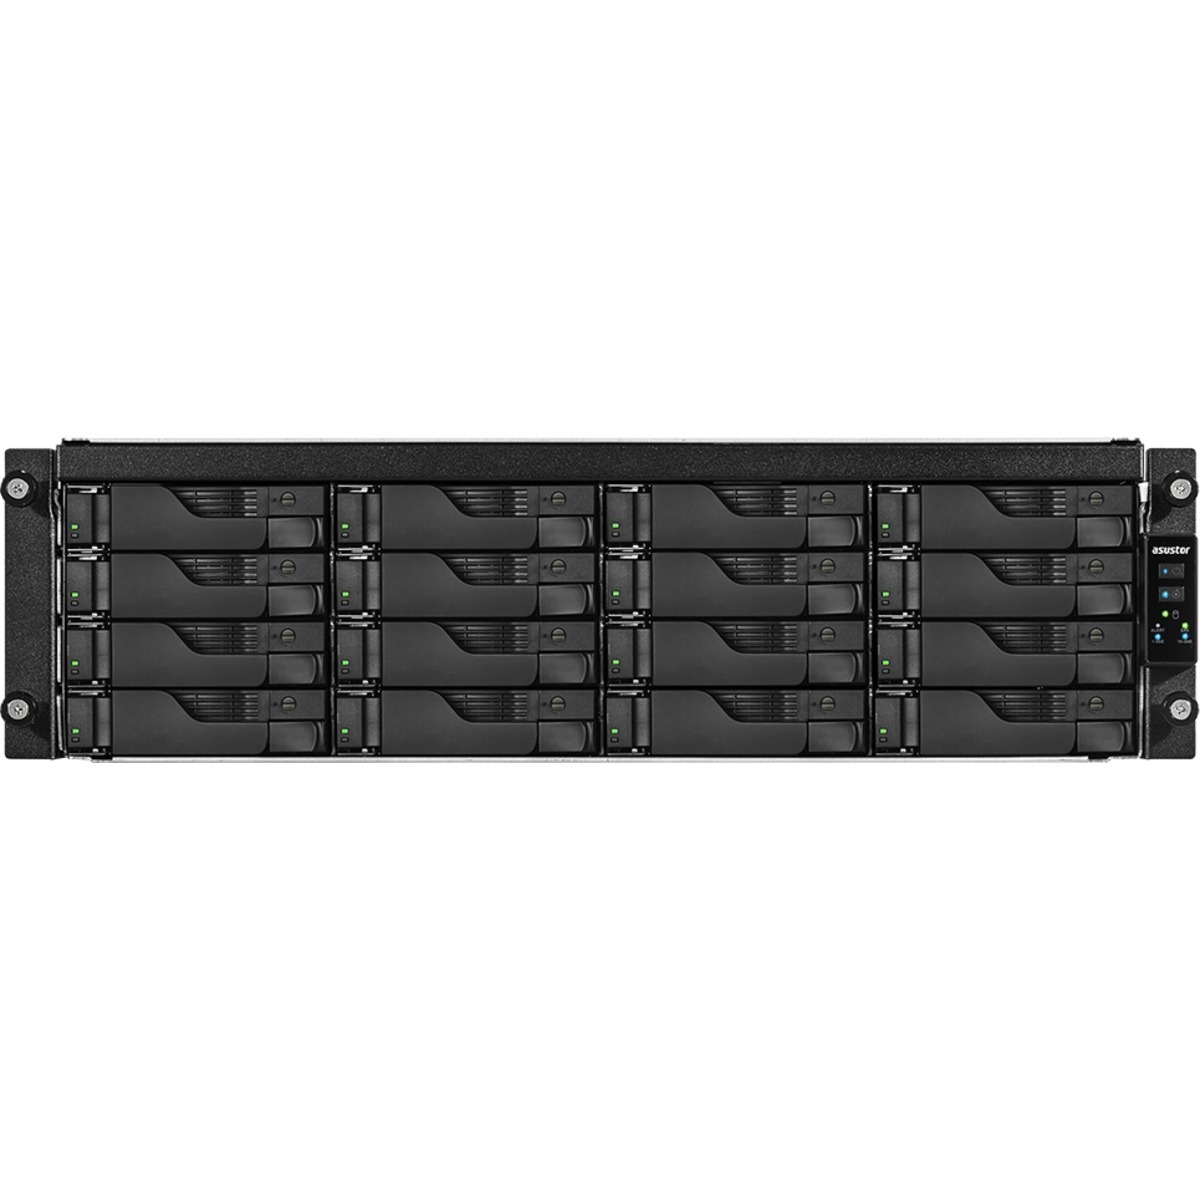 ASUSTOR AS7116RDX Lockerstor 16R Pro 234tb 16-Bay RackMount Large Business / Enterprise NAS - Network Attached Storage Device 13x18tb Western Digital Red Pro WD181KFGX 3.5 7200rpm SATA 6Gb/s HDD NAS Class Drives Installed - Burn-In Tested AS7116RDX Lockerstor 16R Pro